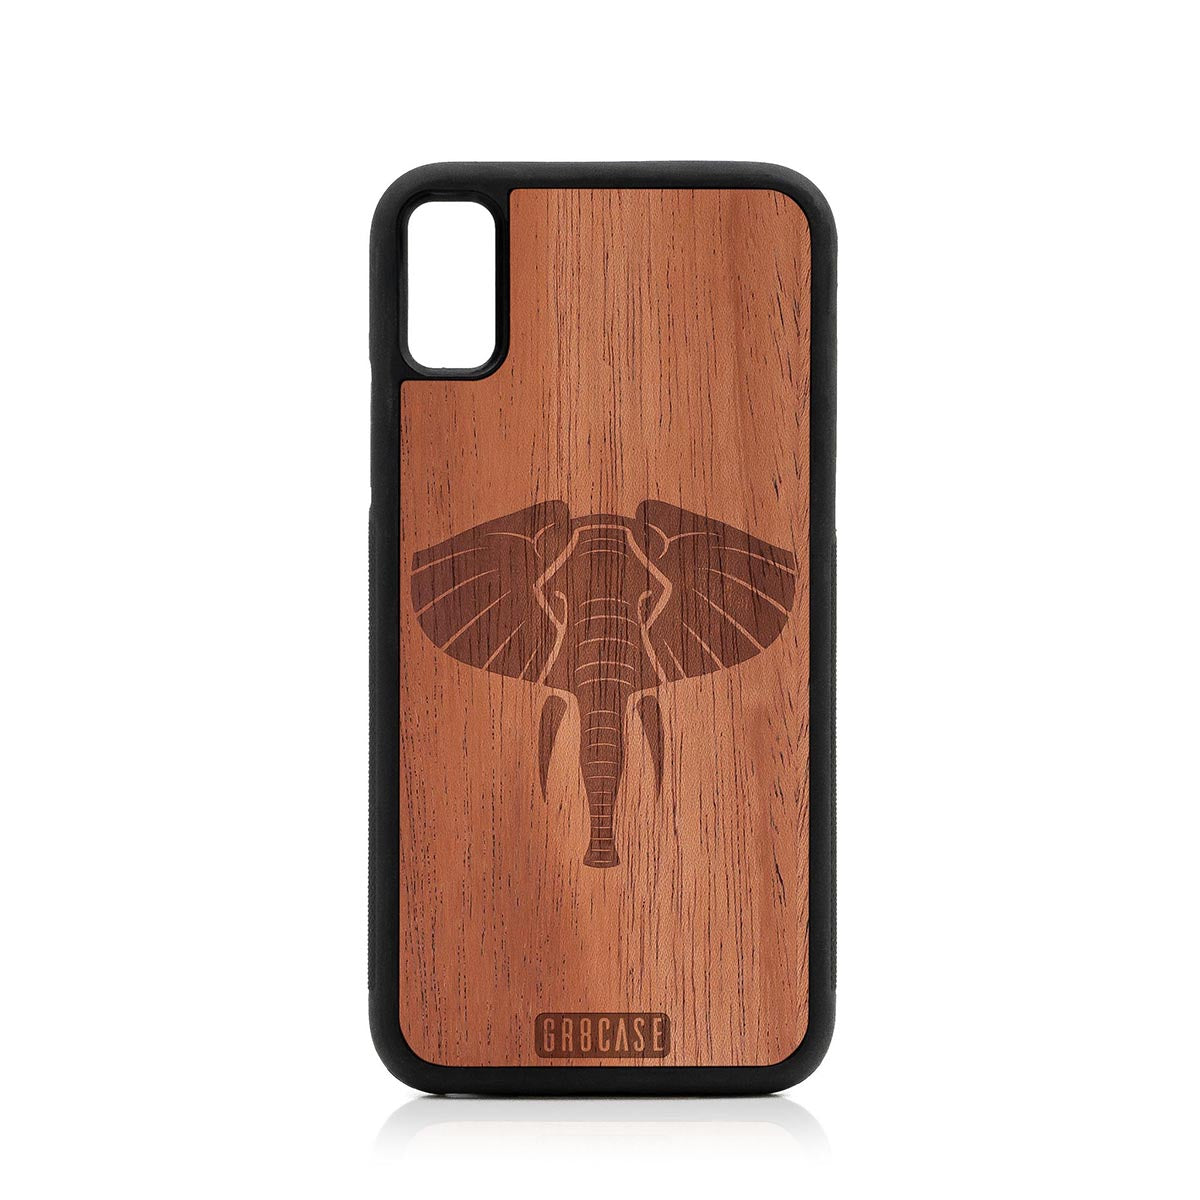 Elephant Design Wood Case For iPhone XS Max by GR8CASE